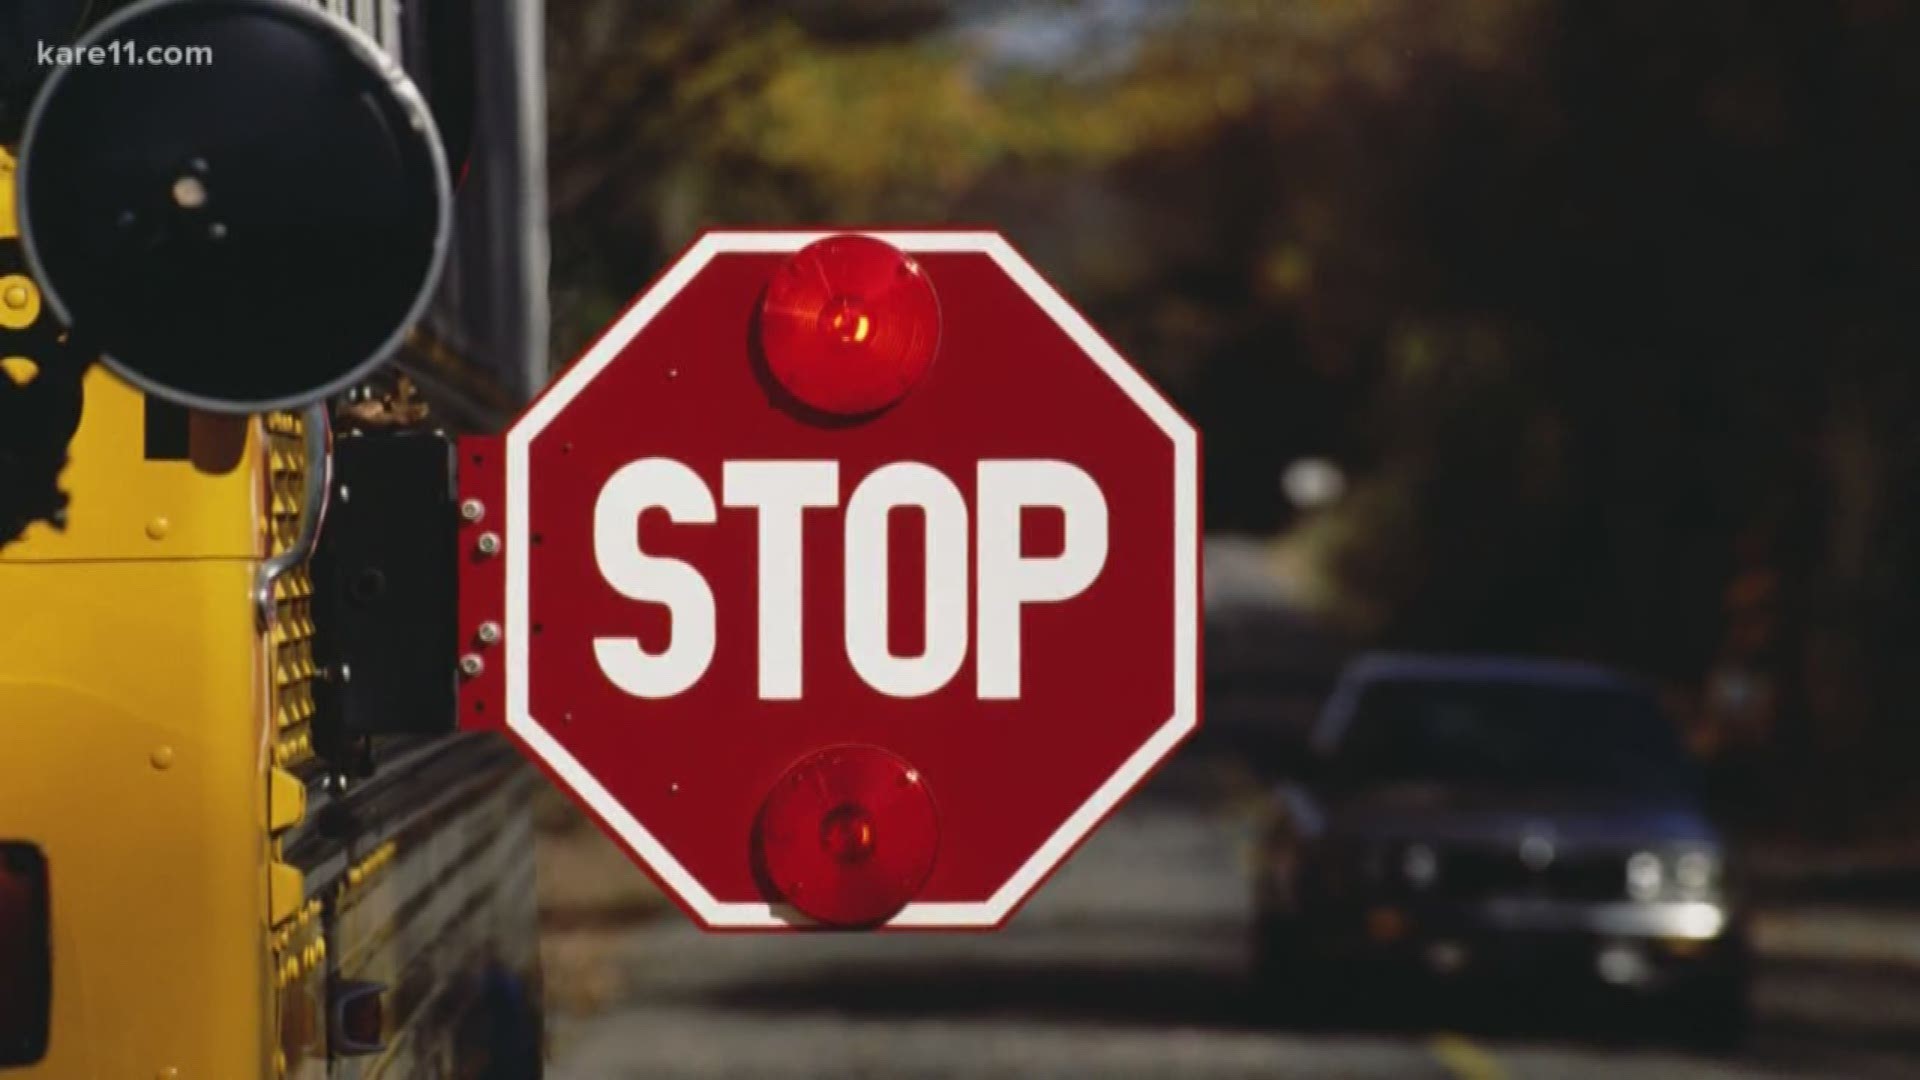 Most kids in Minnesota will be headed back to school sometime in the next two weeks, and police will be watching for drivers who blow past buses with their stop arms out.